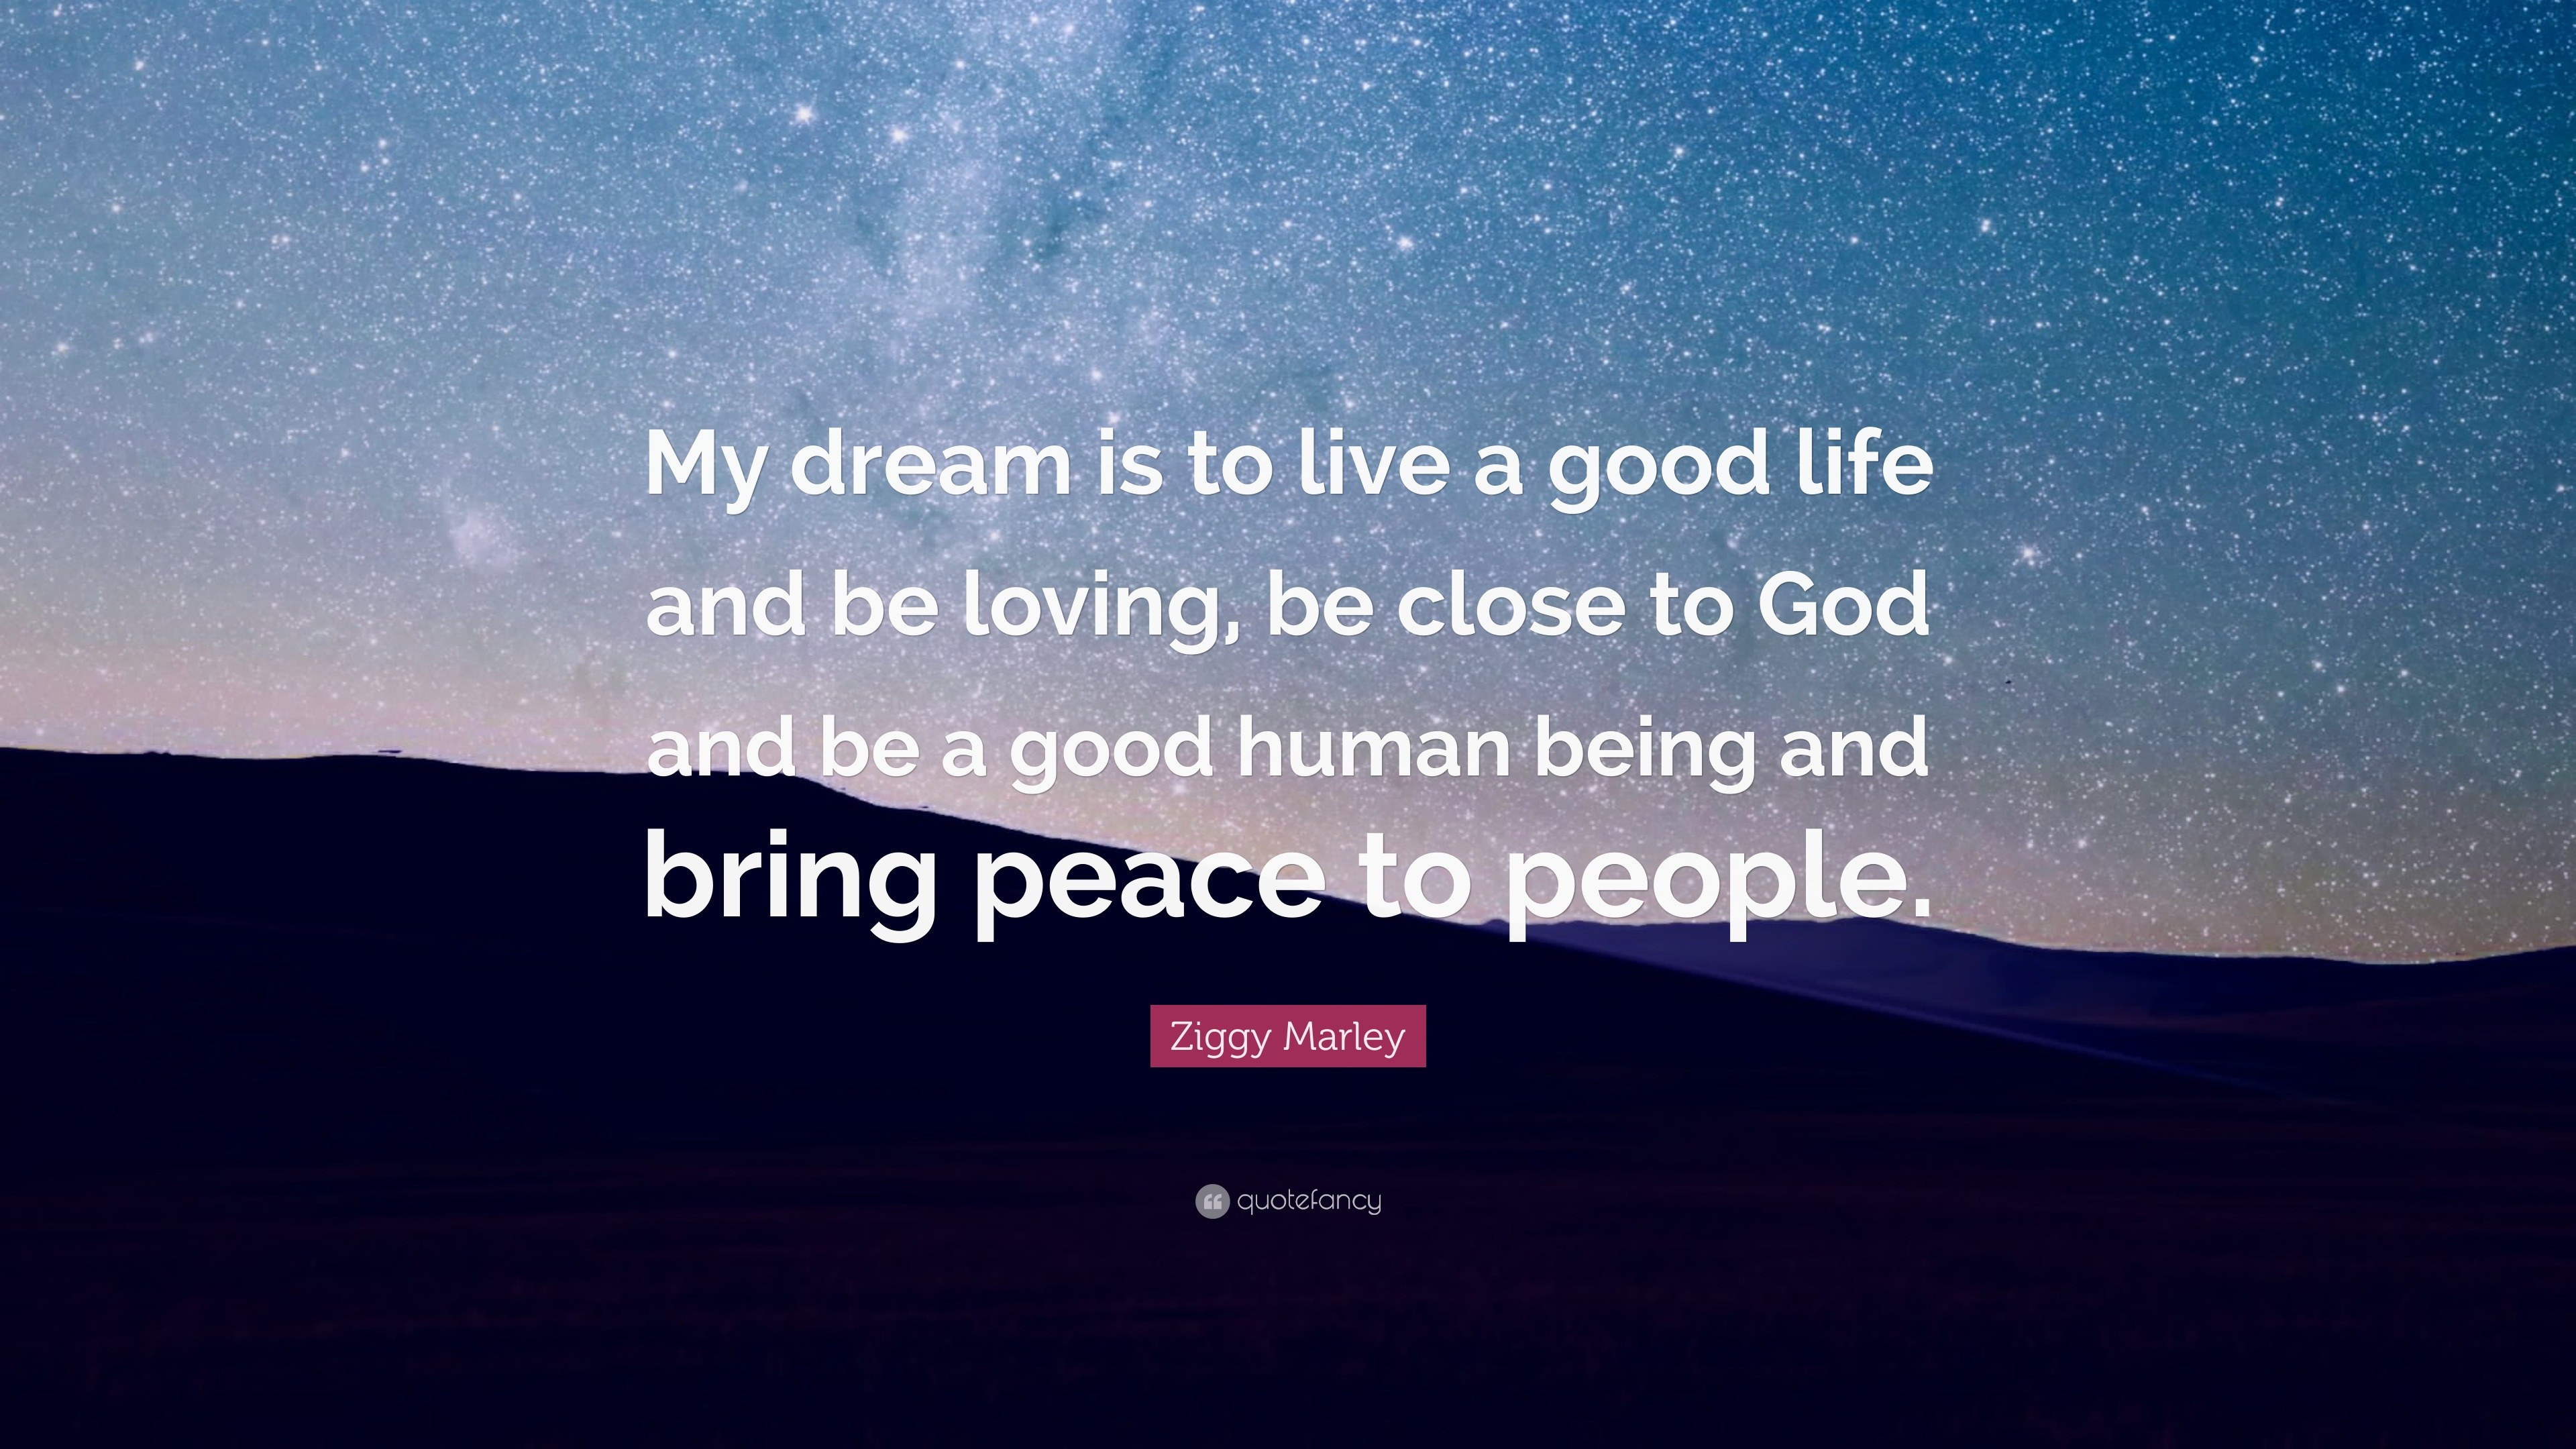 Ziggy Marley Quote: “My dream is to live a good life and be loving